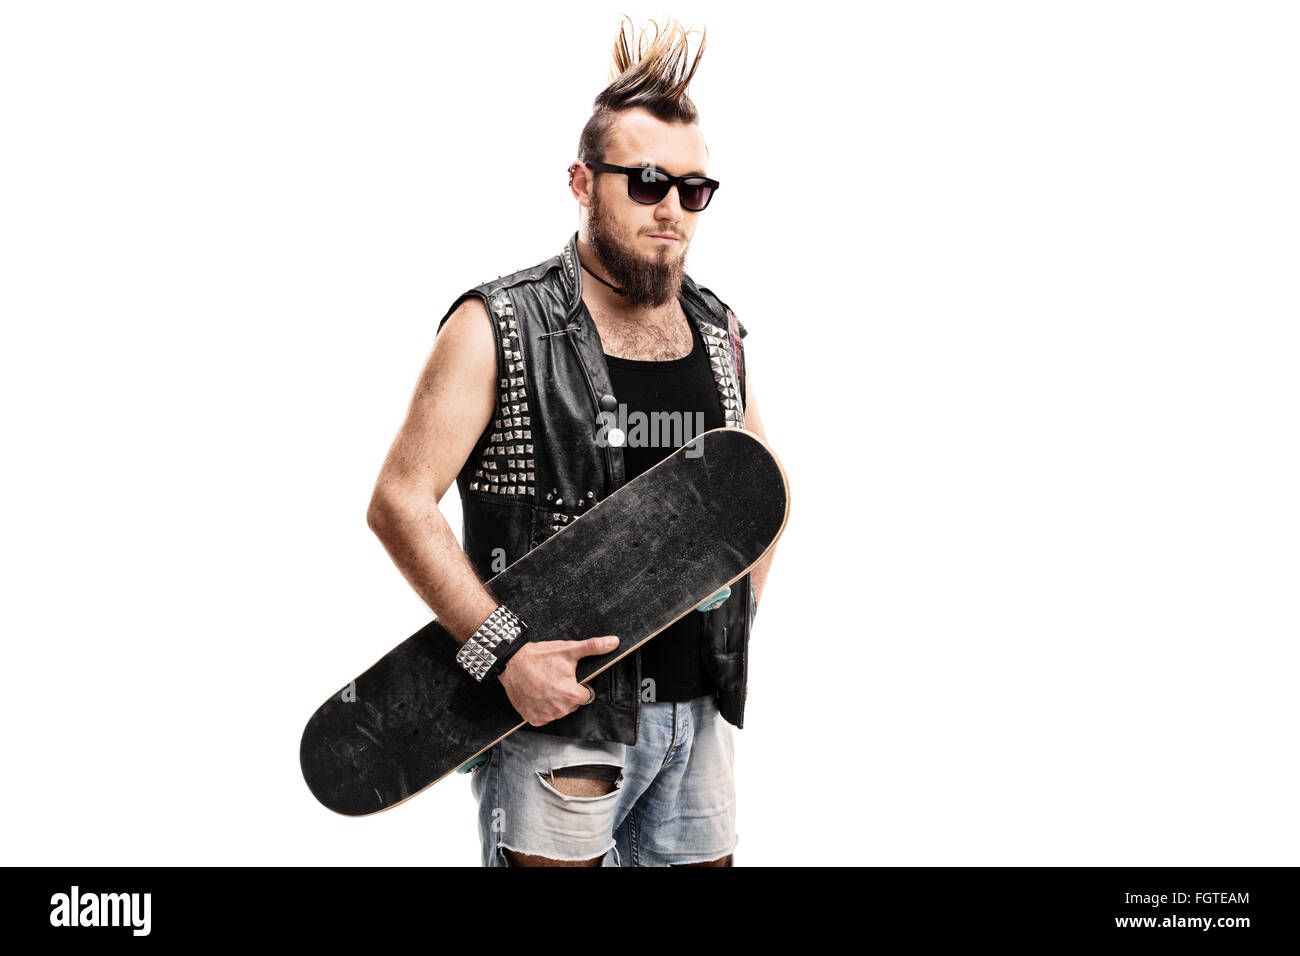 Punk rocker holding a skateboard and looking at the camera isolated on white background Stock Photo